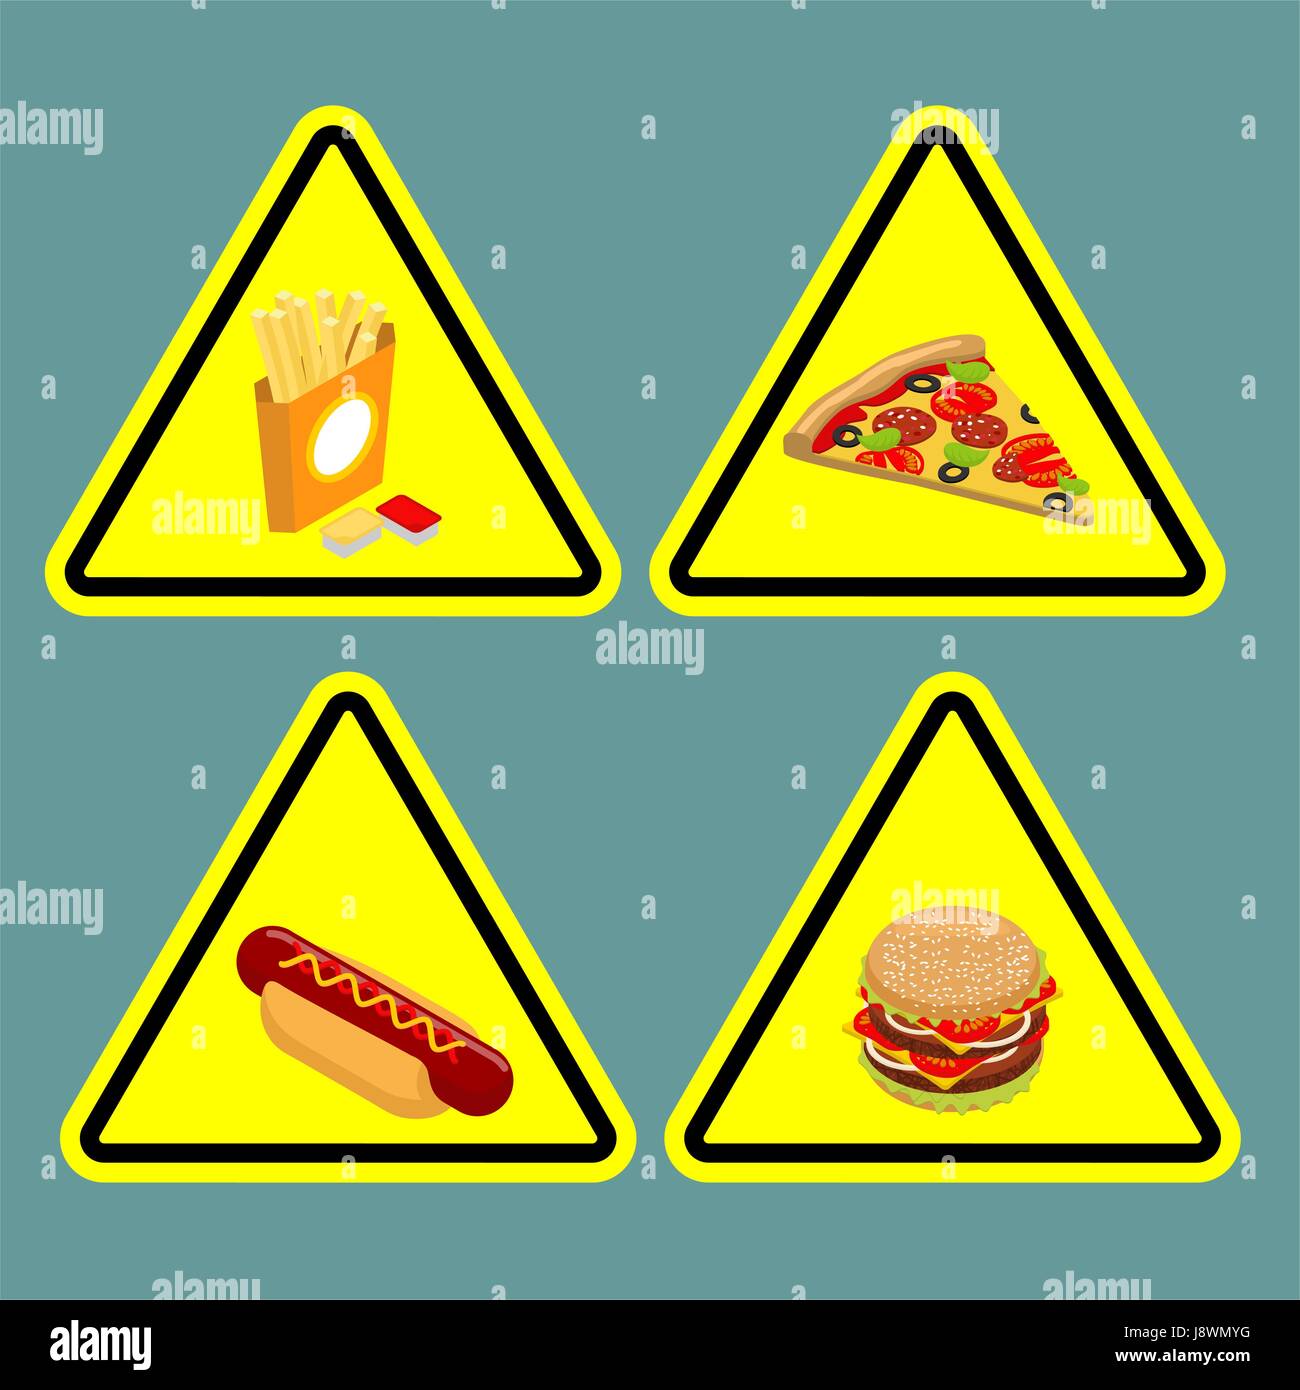 Warning sign fast food. Dangerous foods containing lot of fat. Many of calories. Unhealthy food. Pizza and hamburger. Hot dog and french fries. Collec Stock Vector